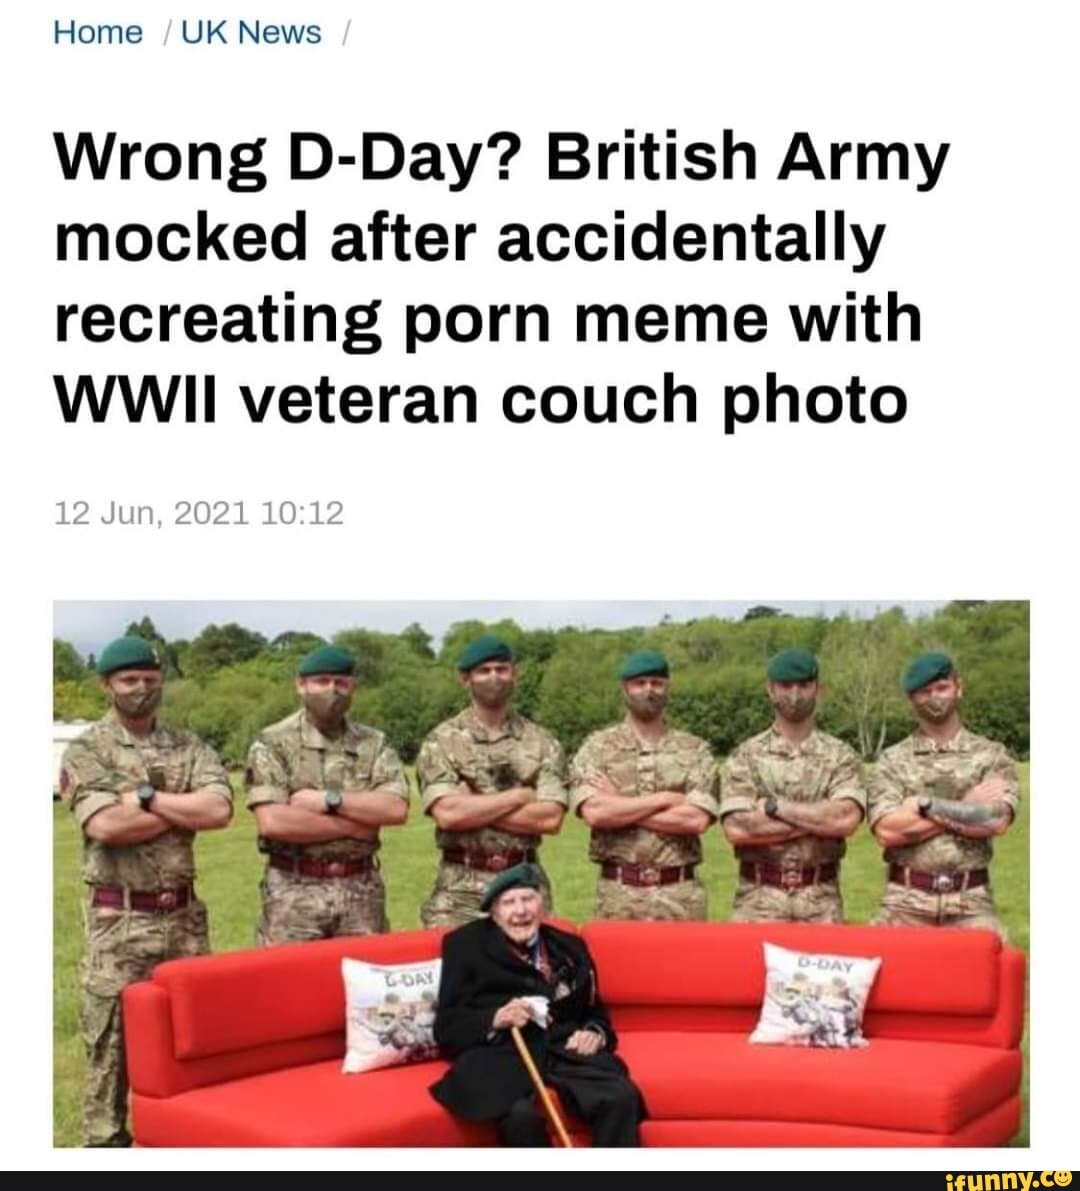 British Porn Meme - Home /UK News / Wrong D-Day? British Army mocked after accidentally  recreating porn meme with WWII veteran couch photo 12 Jun, 2021 - iFunny